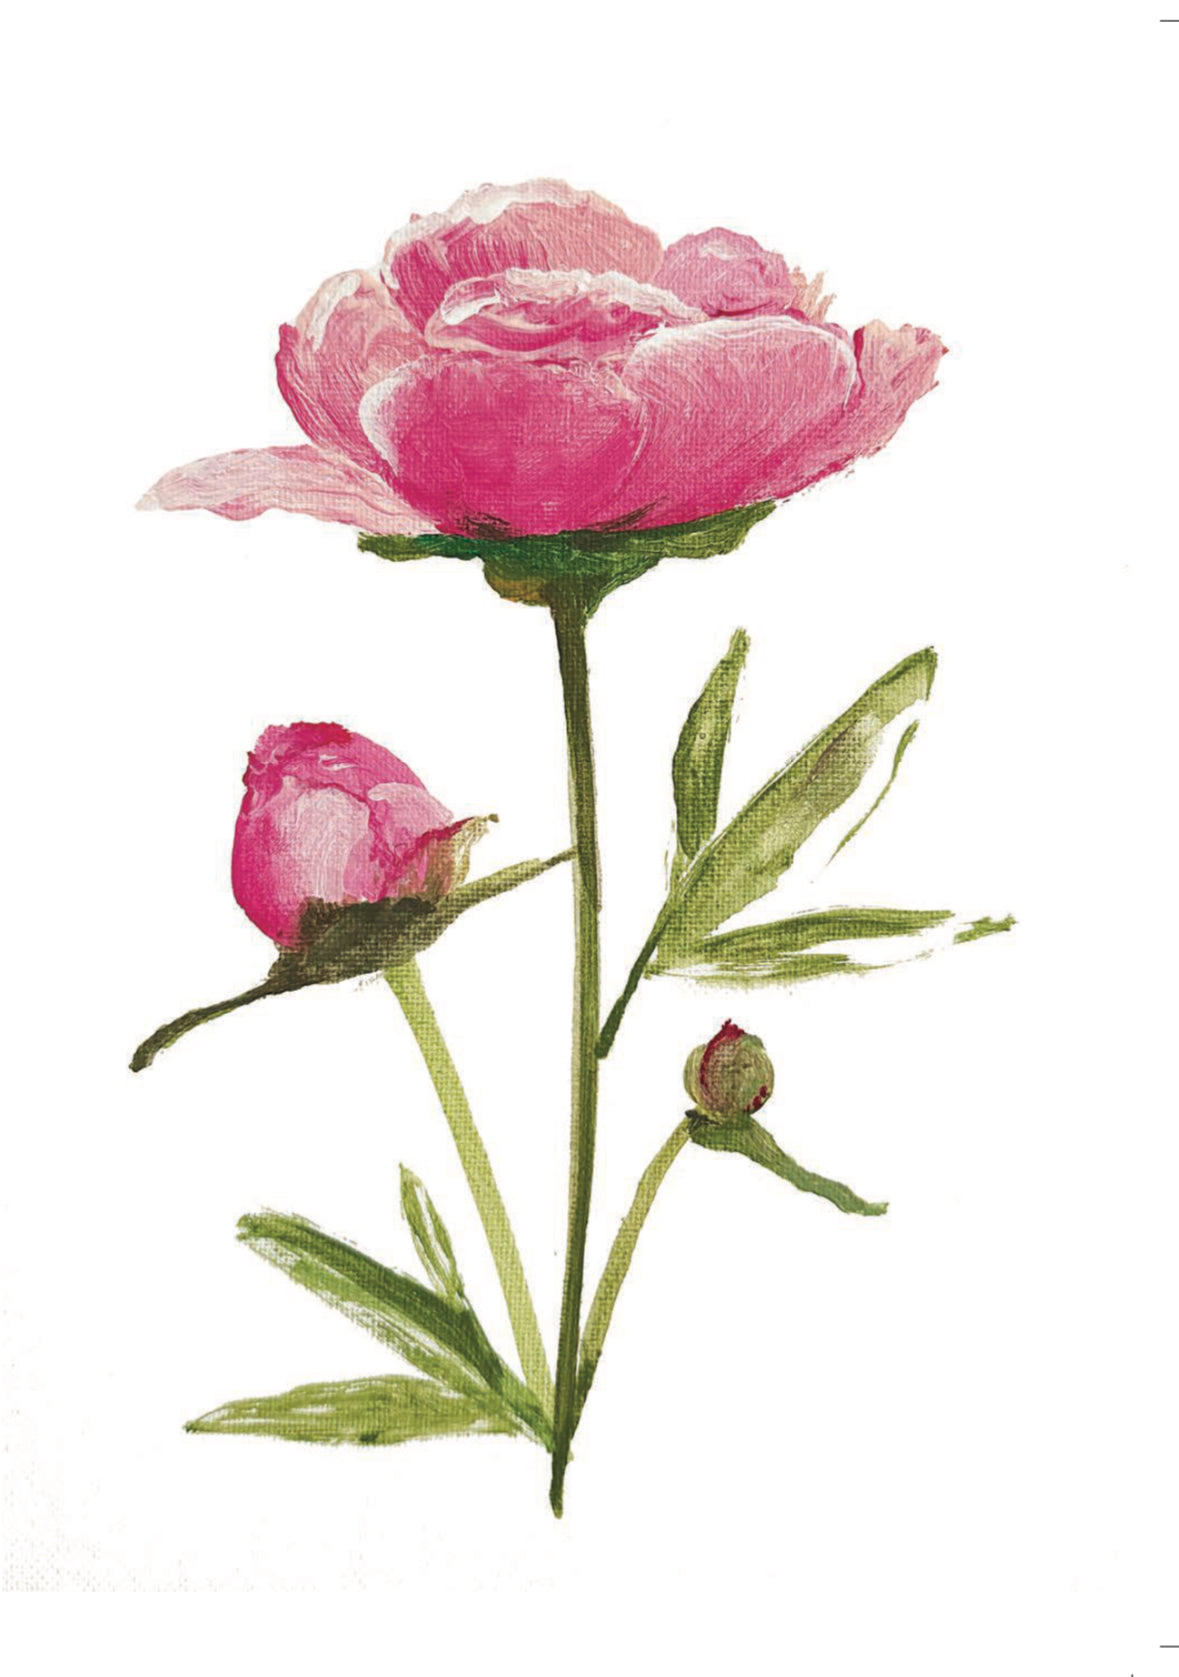 <p>Pink Painted Peony and Peony Bud adorn the front of this blank notecard.</p> <p>&nbsp;</p> <p>Original painting by Kristina Petrilli.</p>